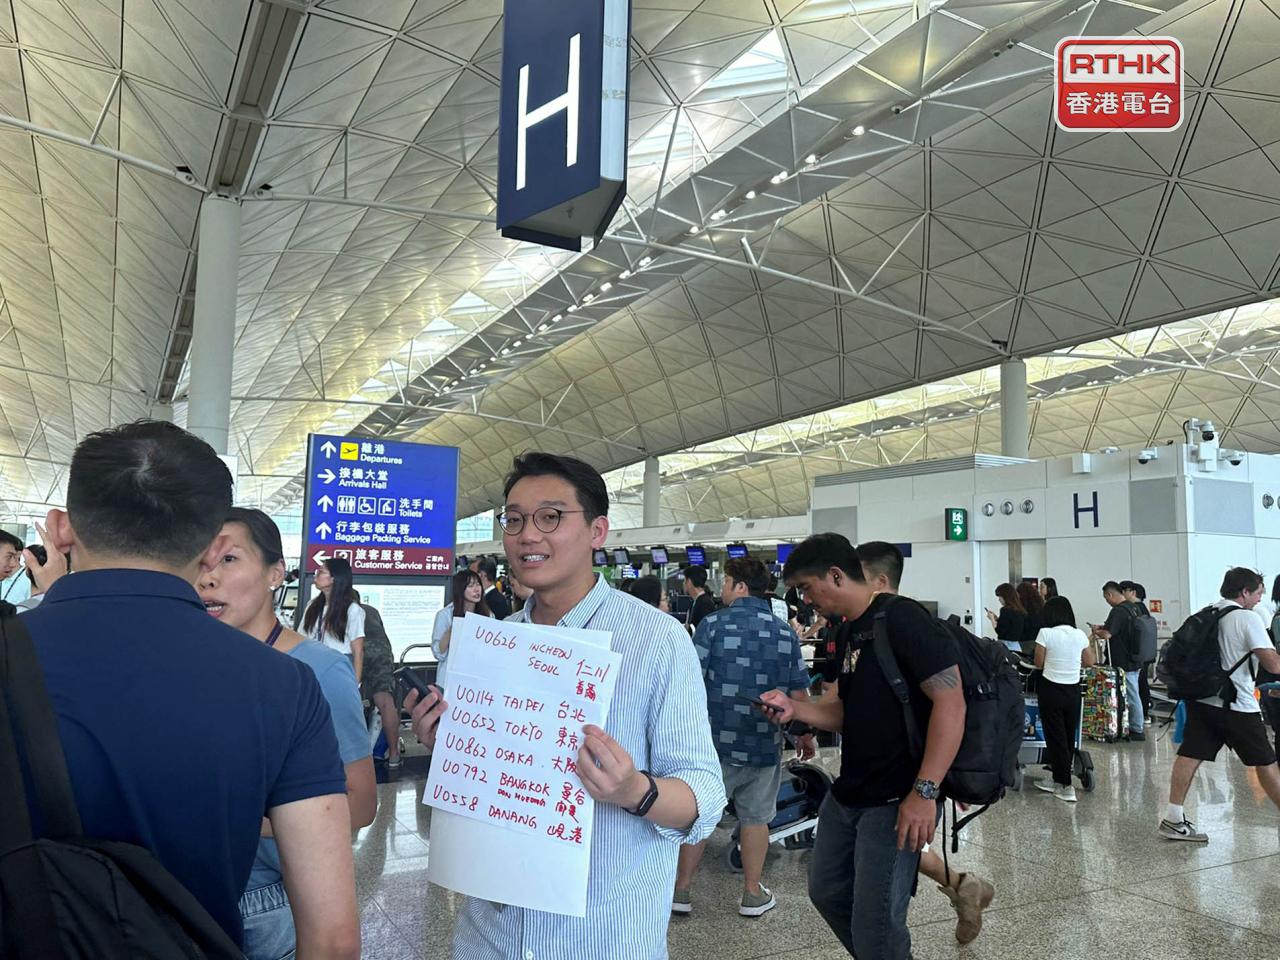 HK airport hit by global IT outage